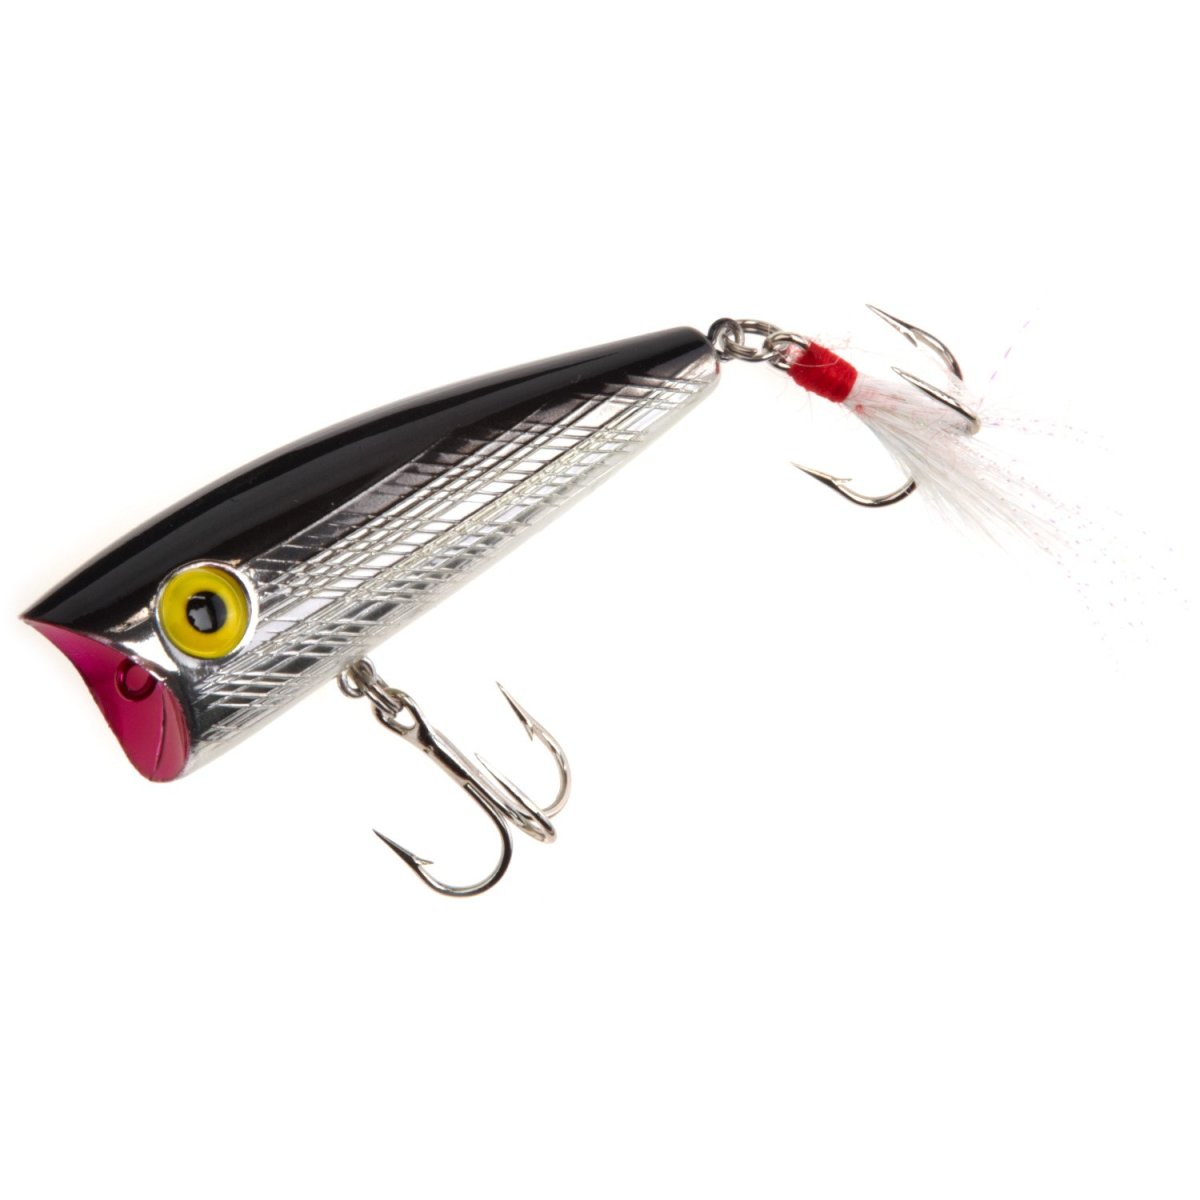 My Review of the Rebel Pop-R Lure for Topwater Bass Fishing